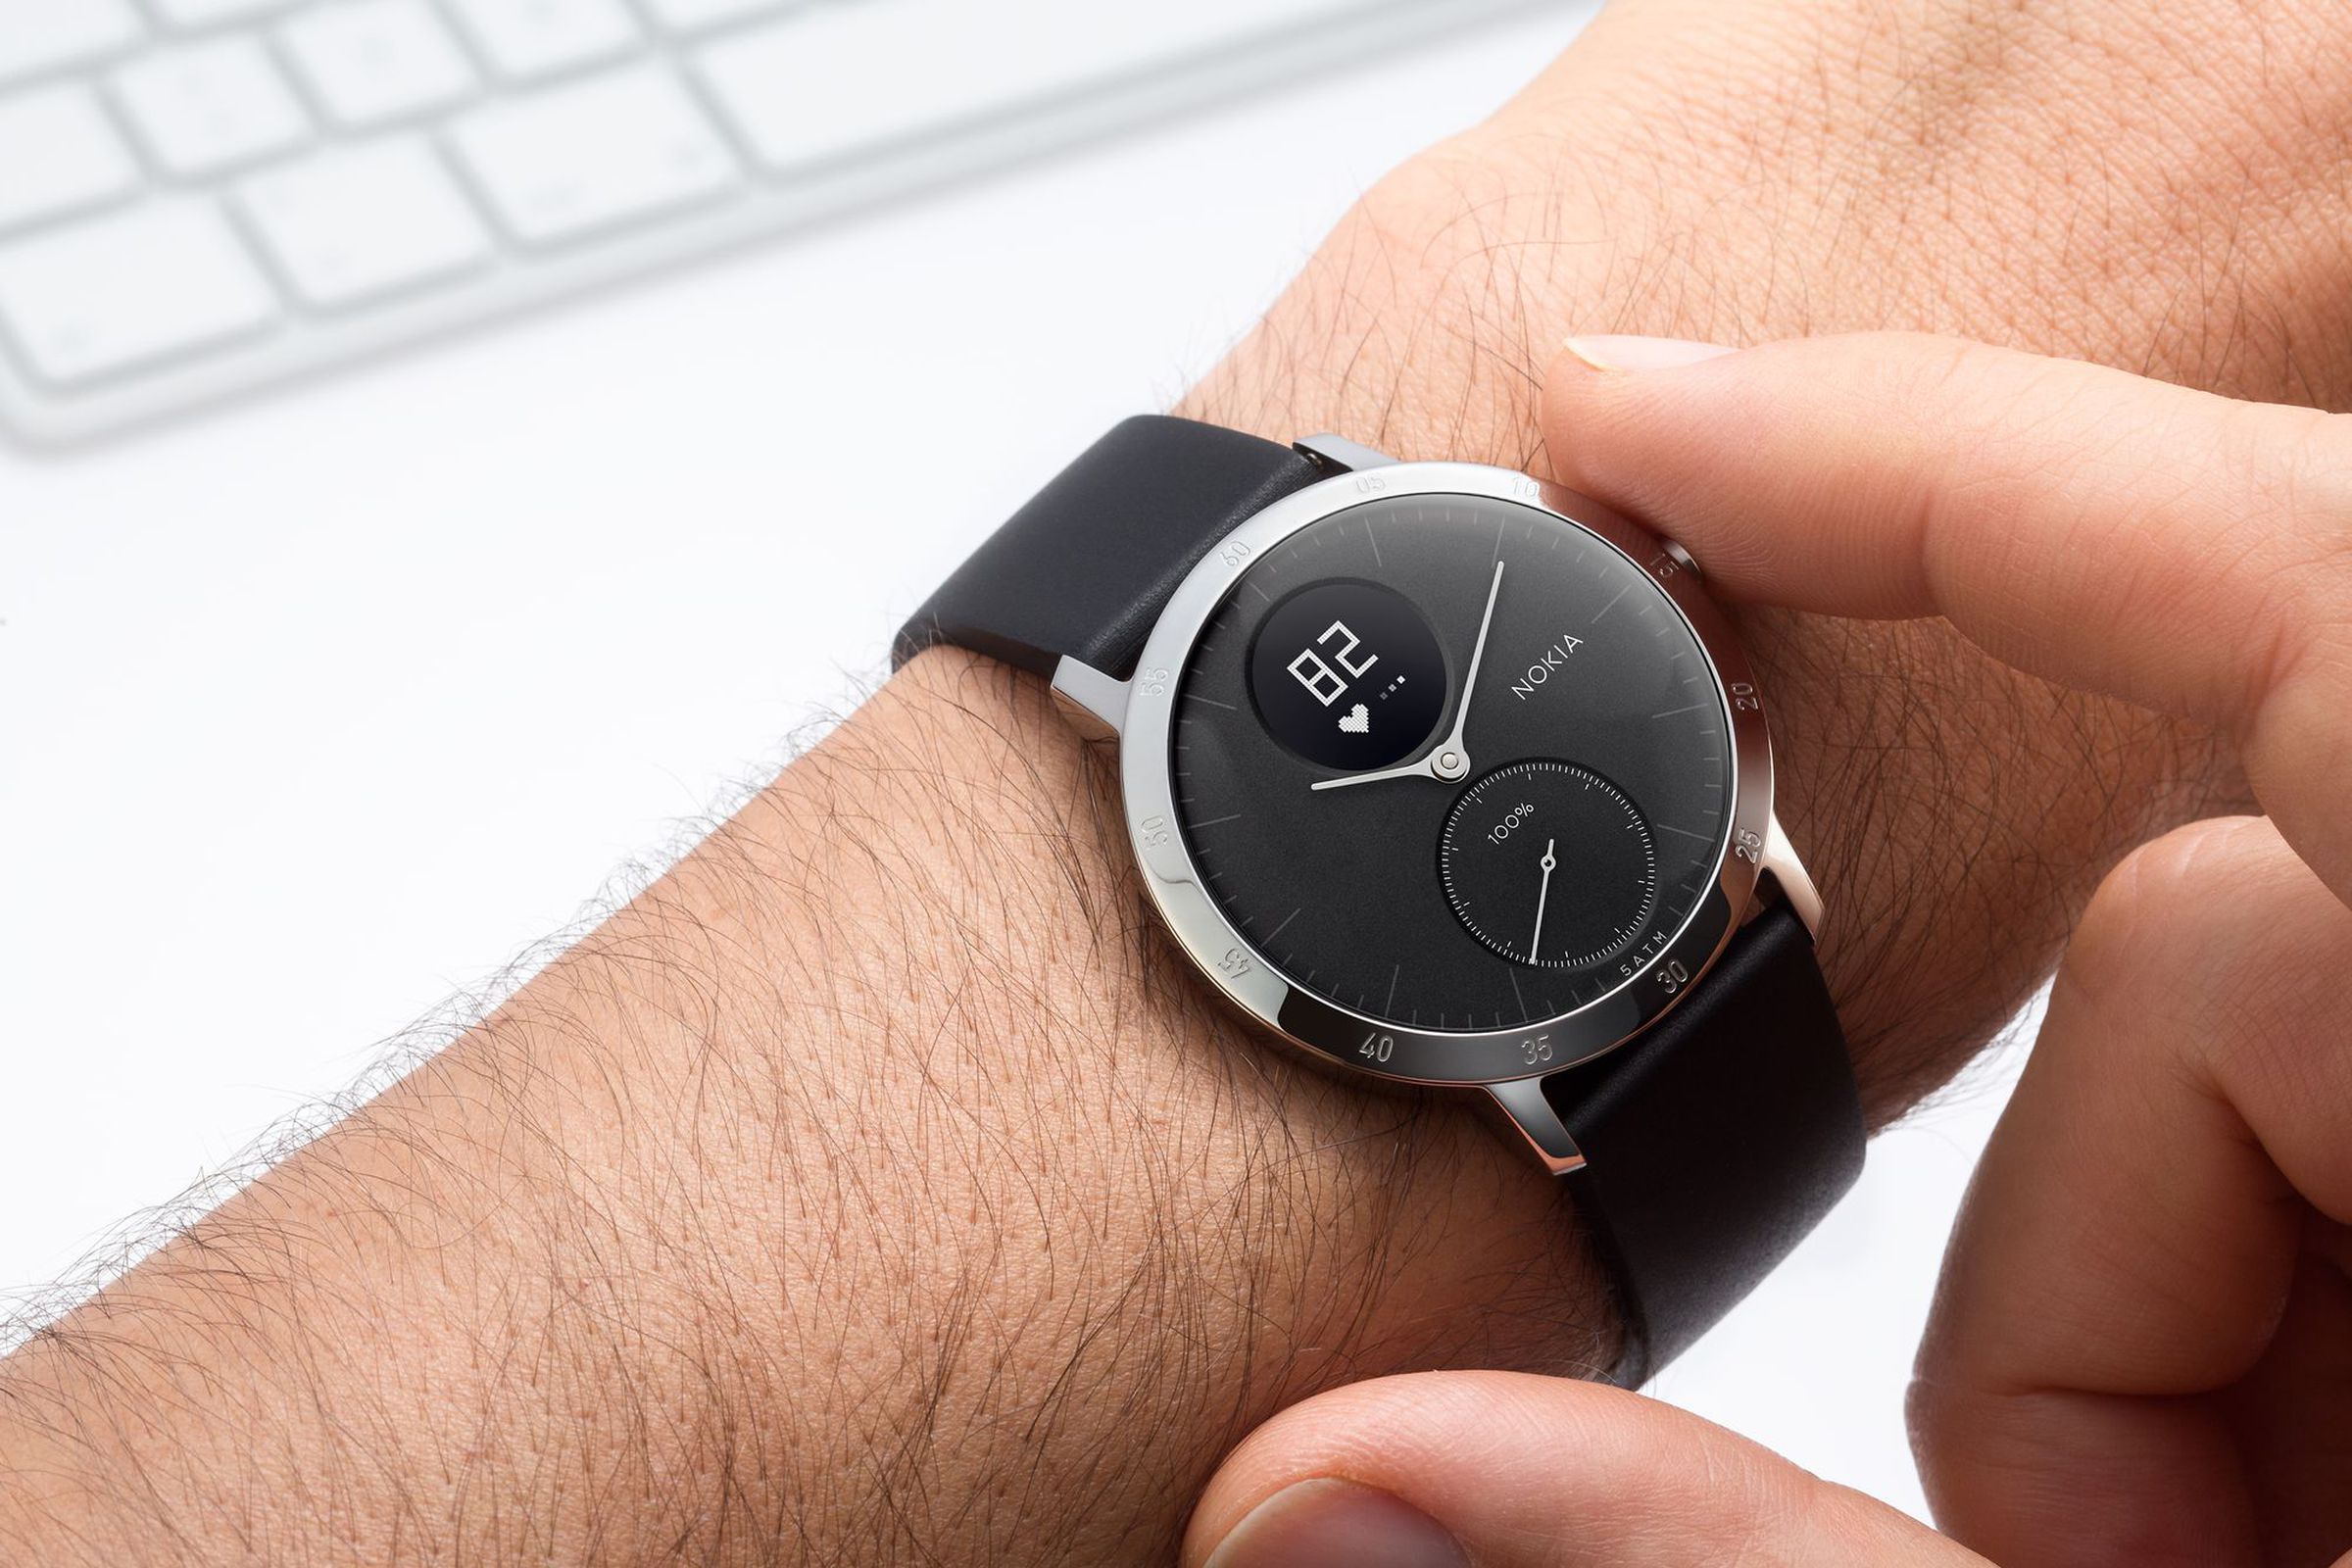 Nokia’s Steel HR fitness tracker and watch — a rebranding of a former Withings product. 